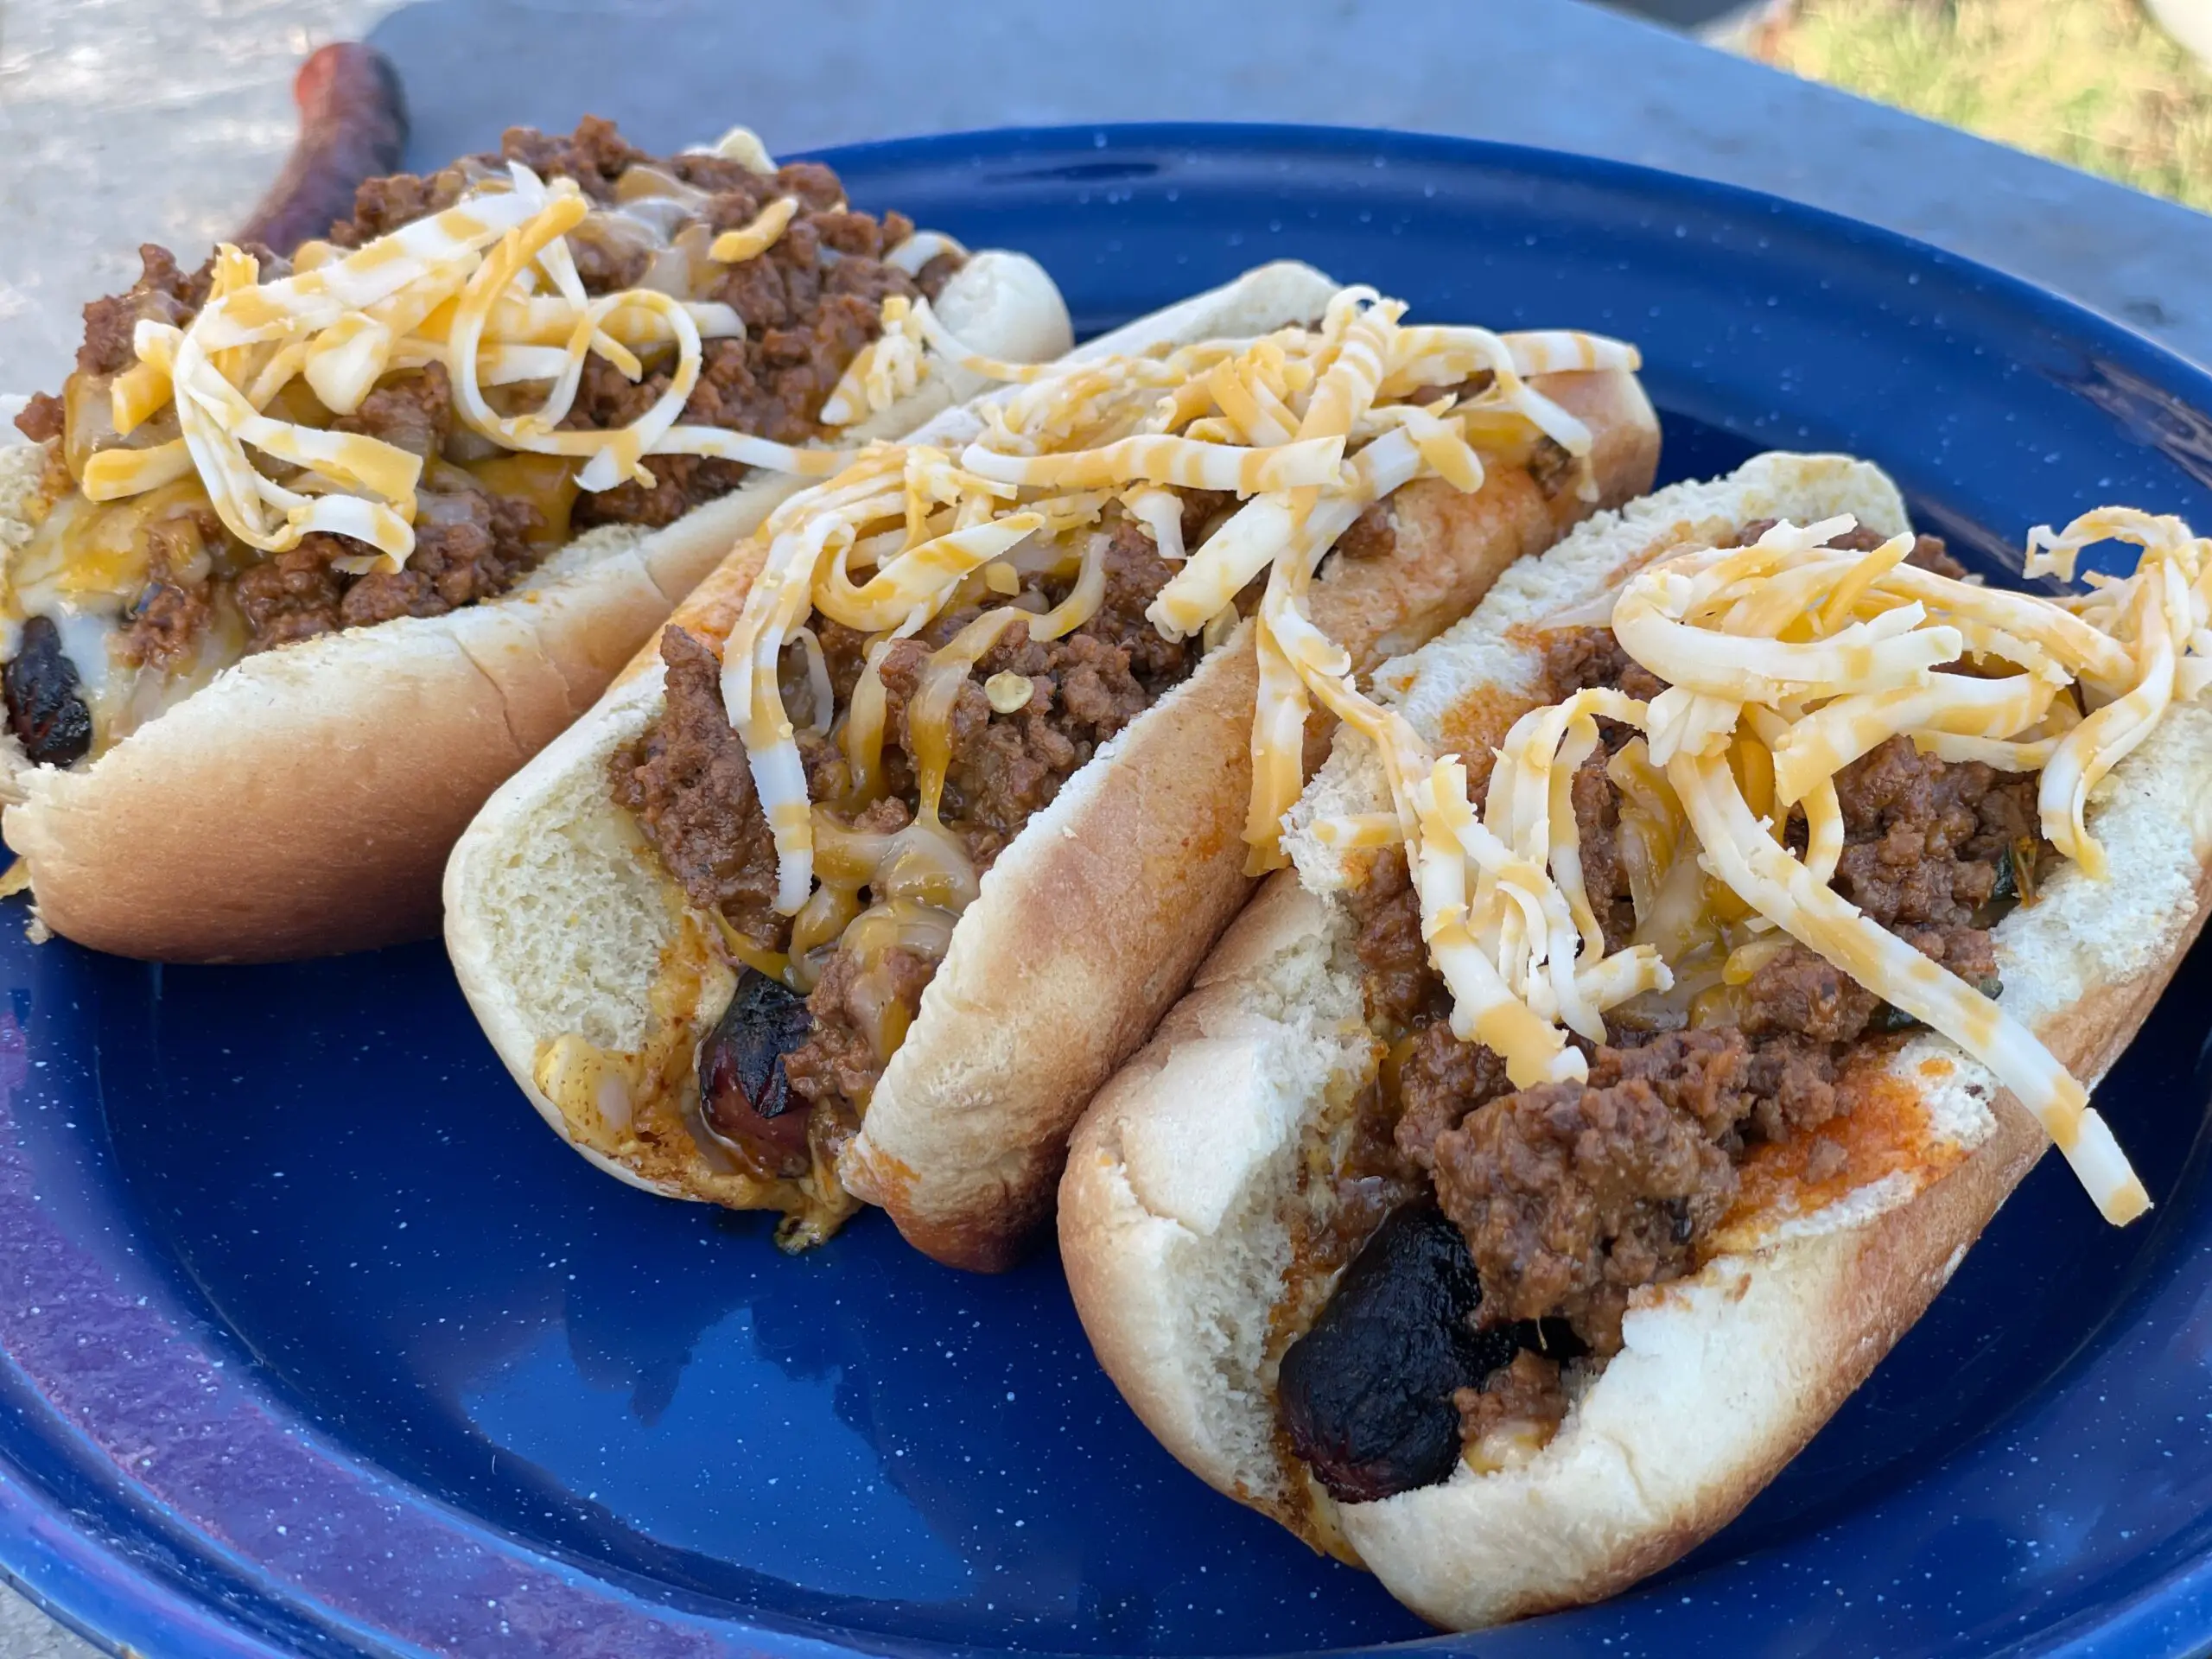 https://kentrollins.com/wp-content/uploads/2021/09/chili-cheese-dog-featured-scaled.jpeg